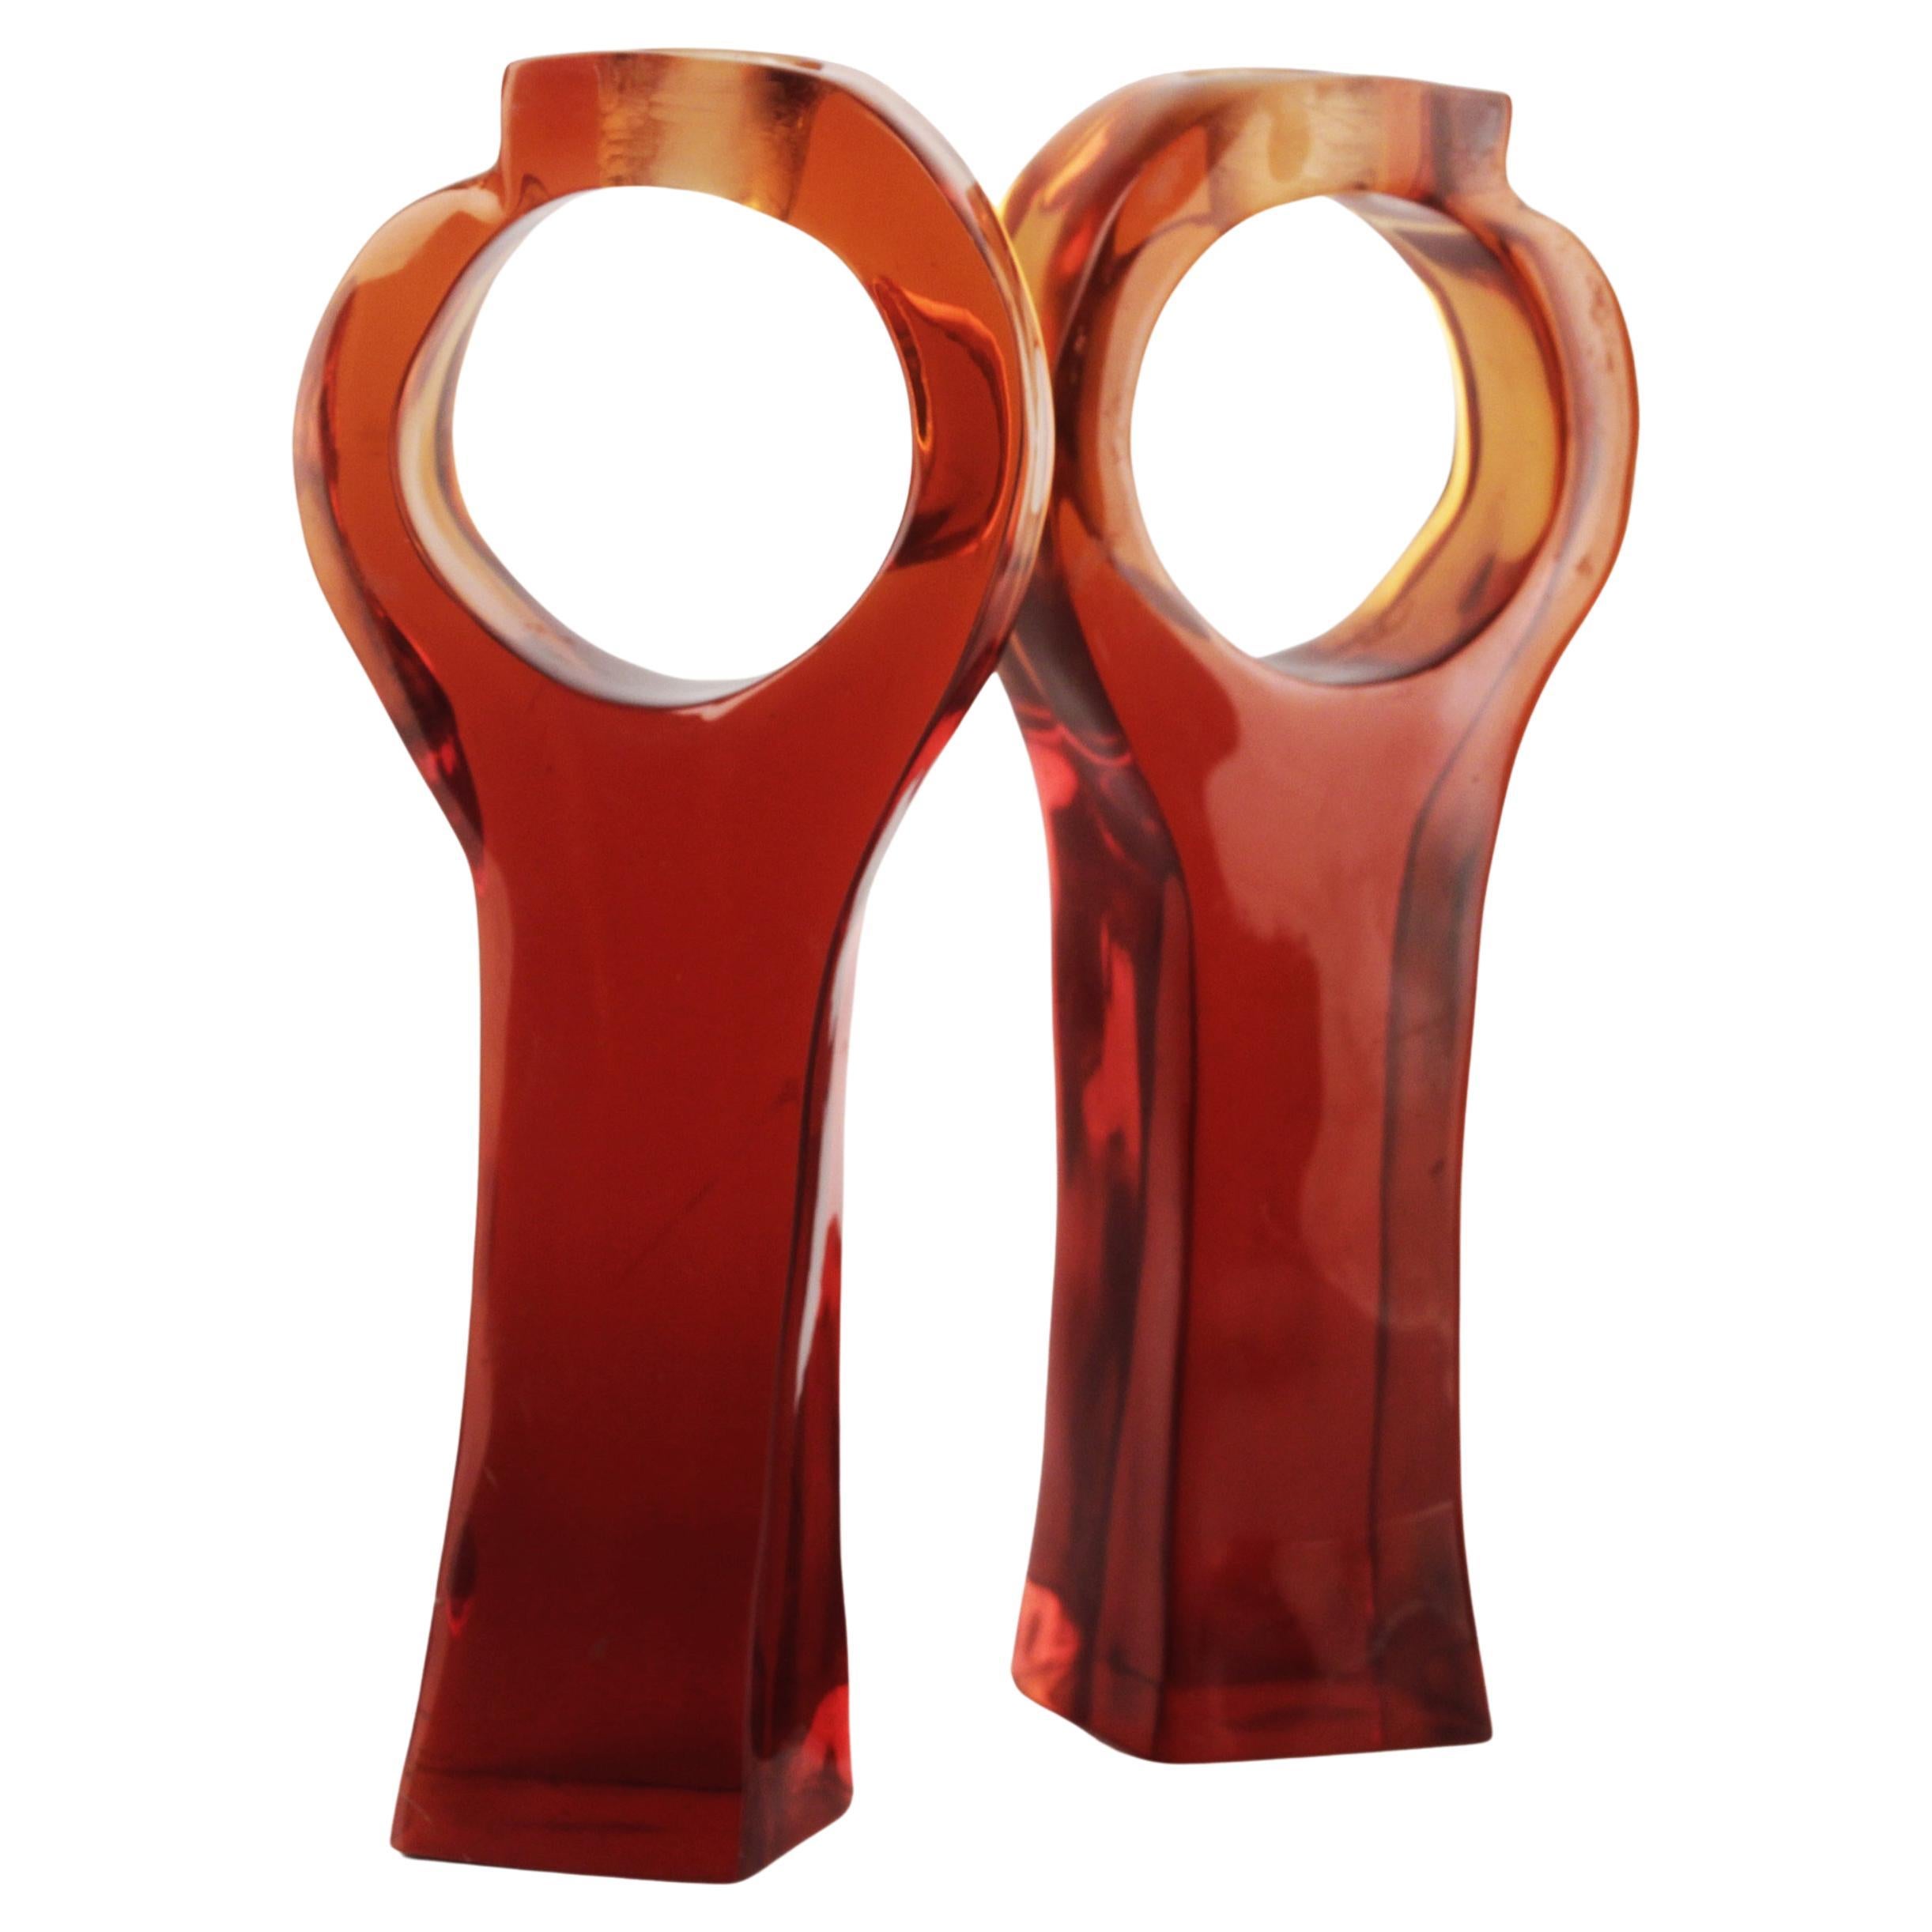 Pair of Italian Mid-Century Modern Red Acrylic/Lucite Geometric Candle Holders For Sale